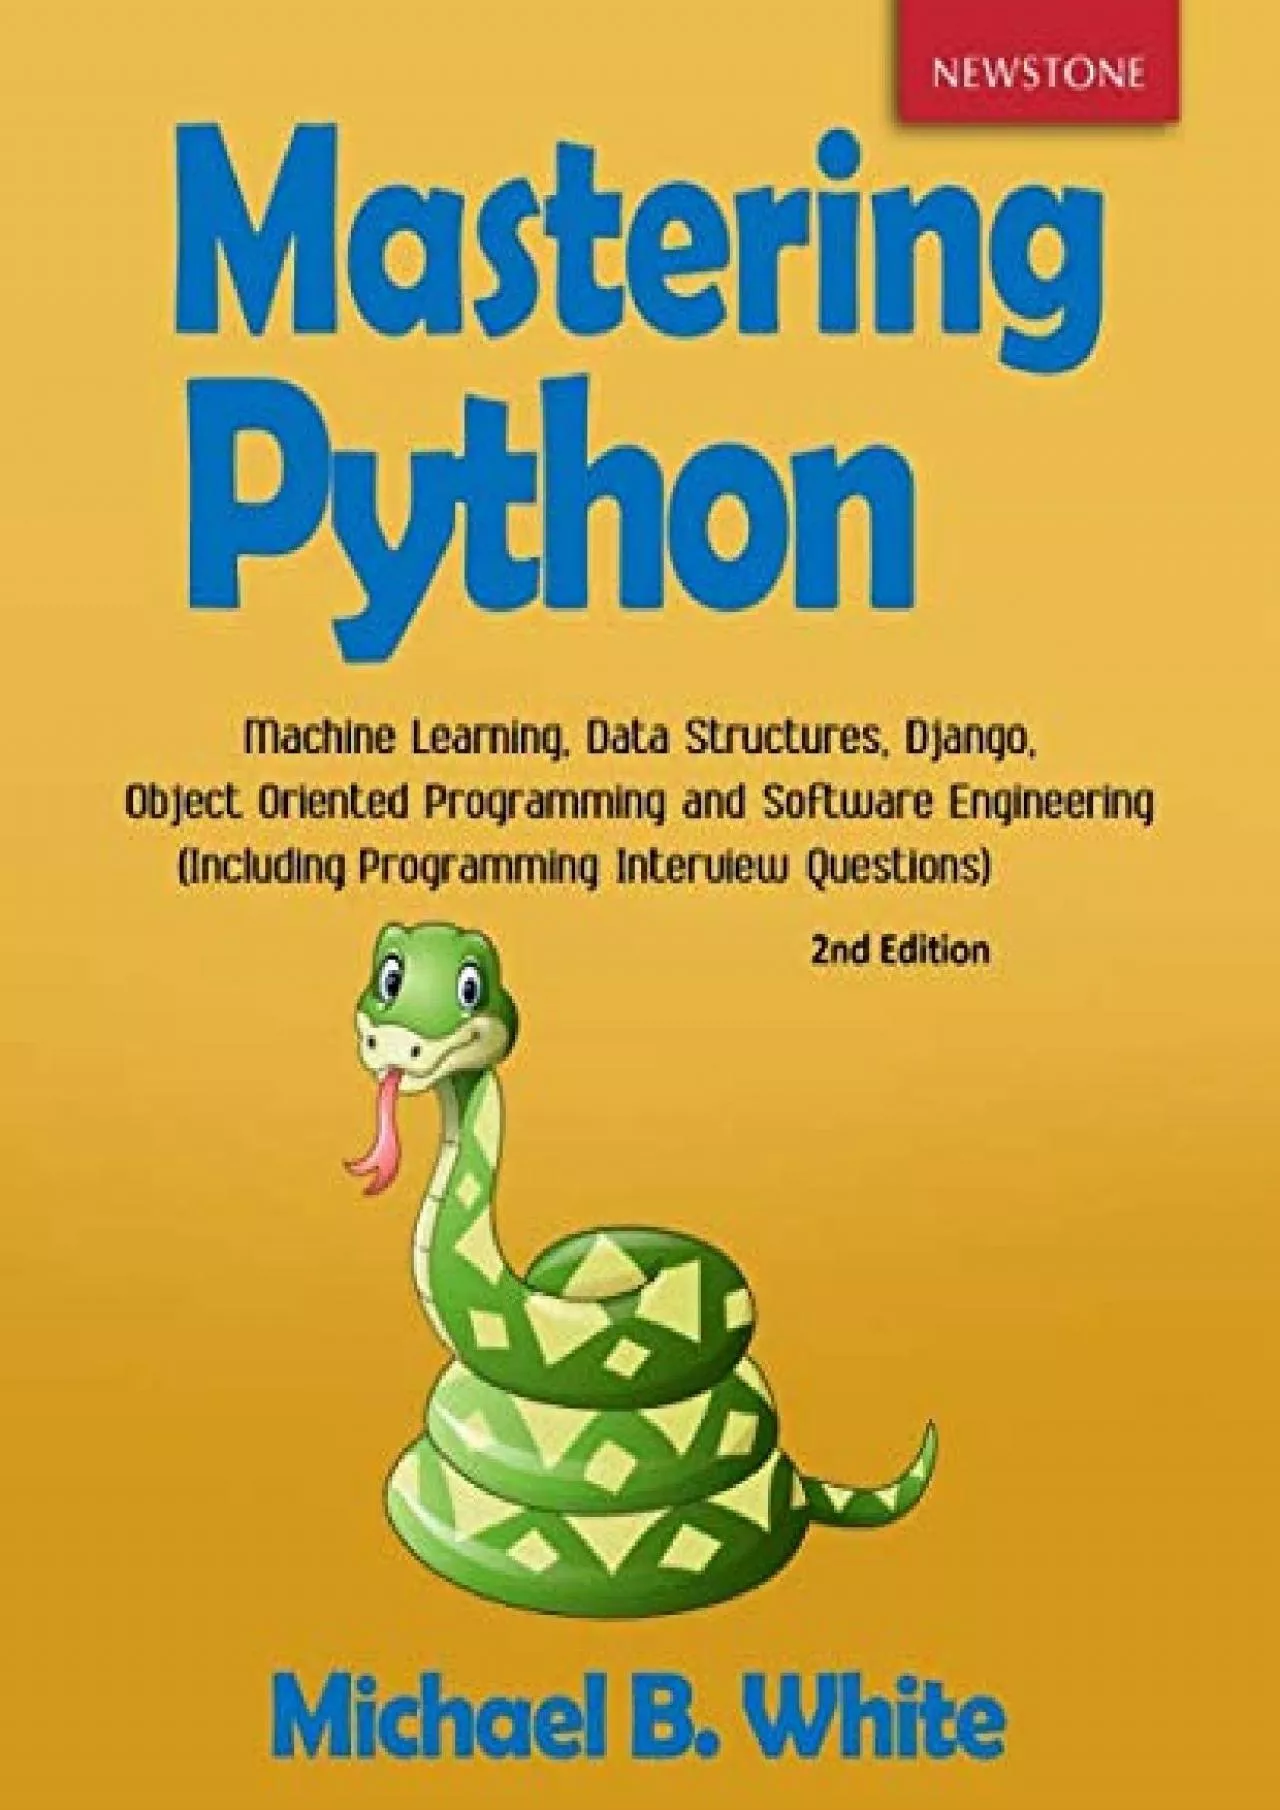 [READING BOOK]-Mastering Python: Machine Learning, Data Structures, Django, Object Oriented